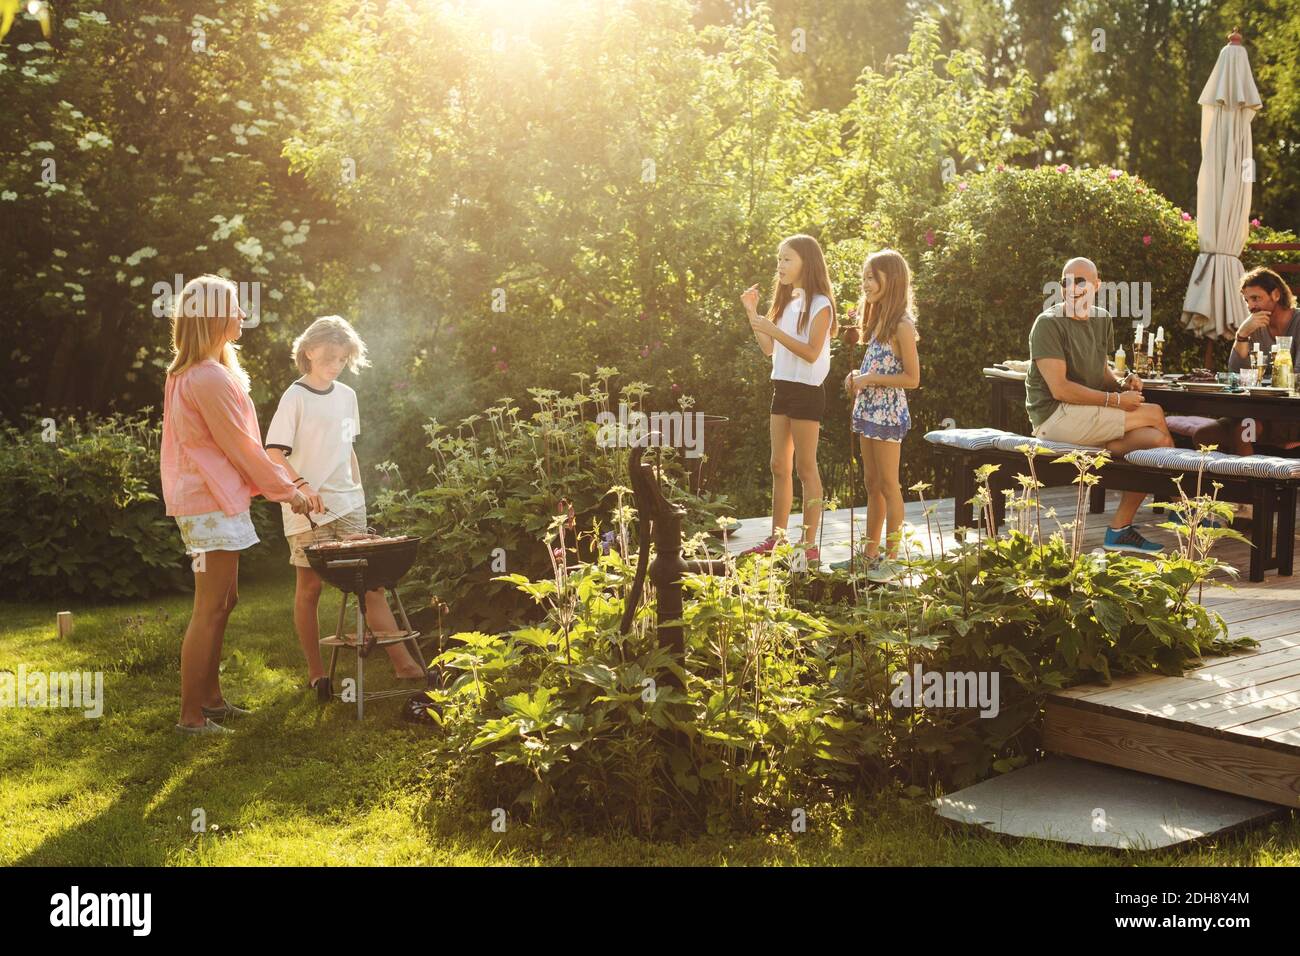 People enjoying summer during garden party on sunny day Stock Photo